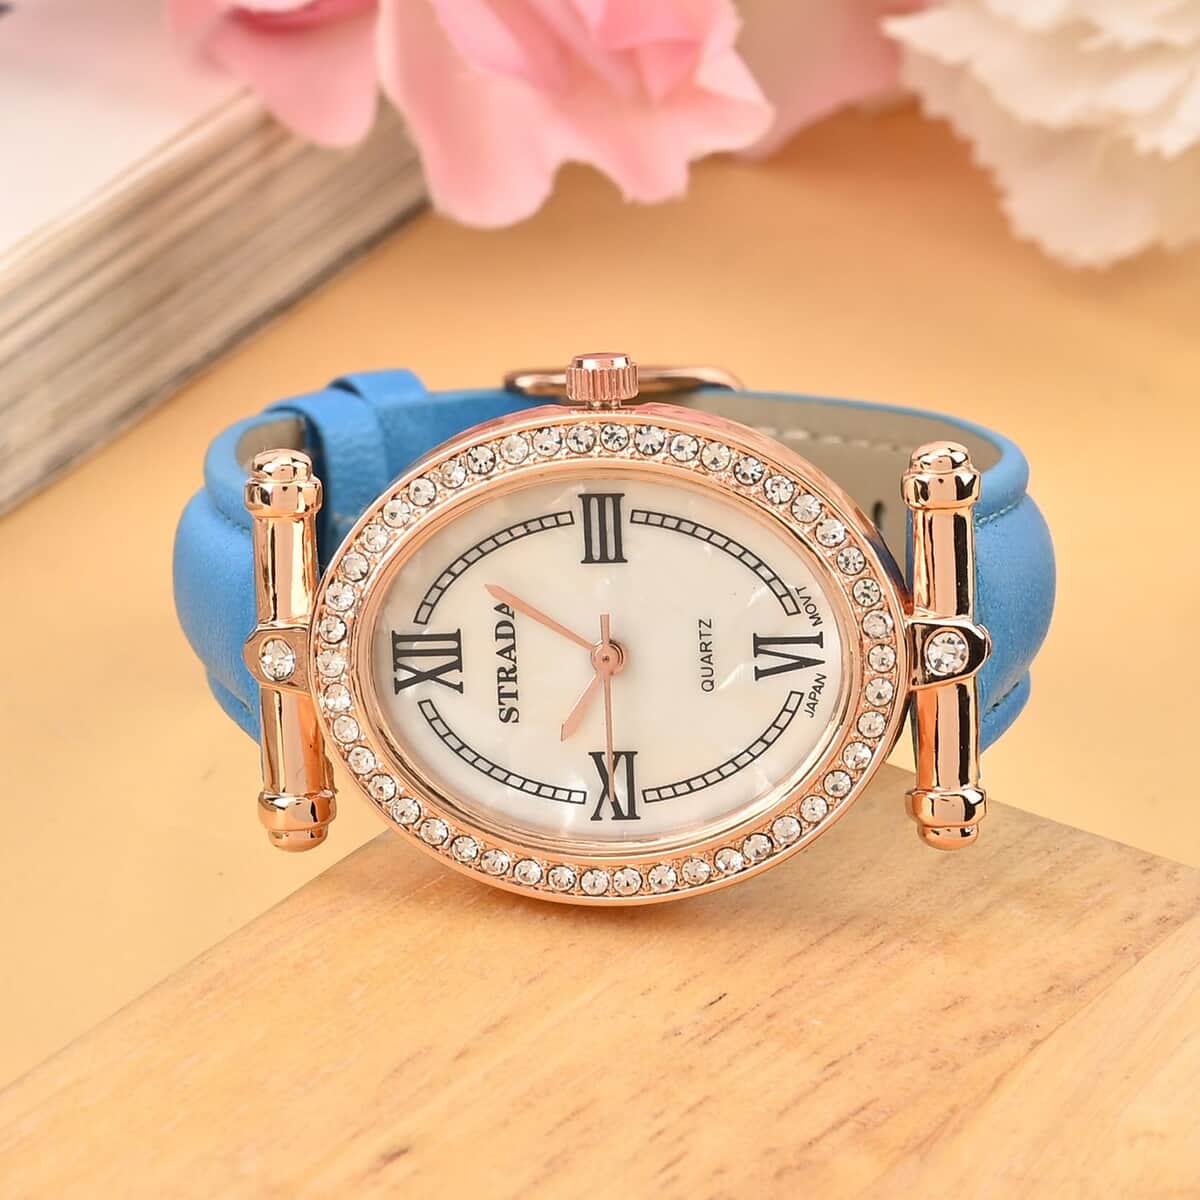 Strada White Austrian Crystal Japanese Movement Watch in Rosetone with Blue Faux Leather Strap (27.94-34.29mm) (6.75-8.50 Inches) image number 1